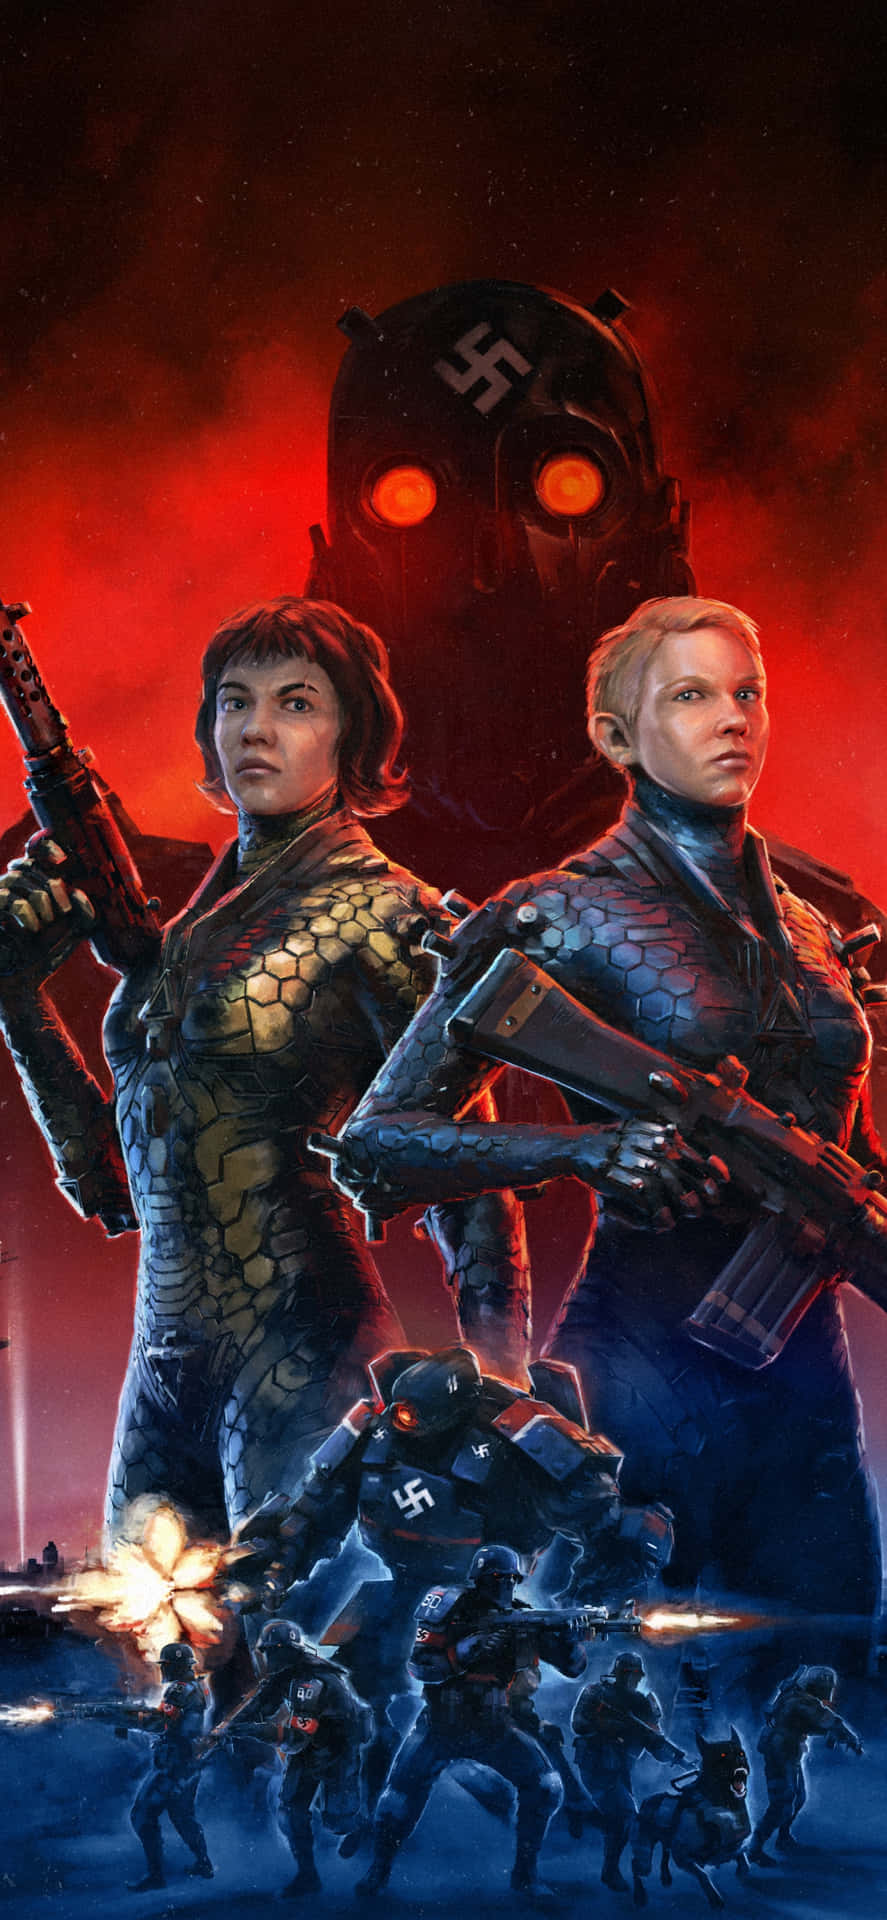 Wolfenstein II the New Colossus on Iphone Xs